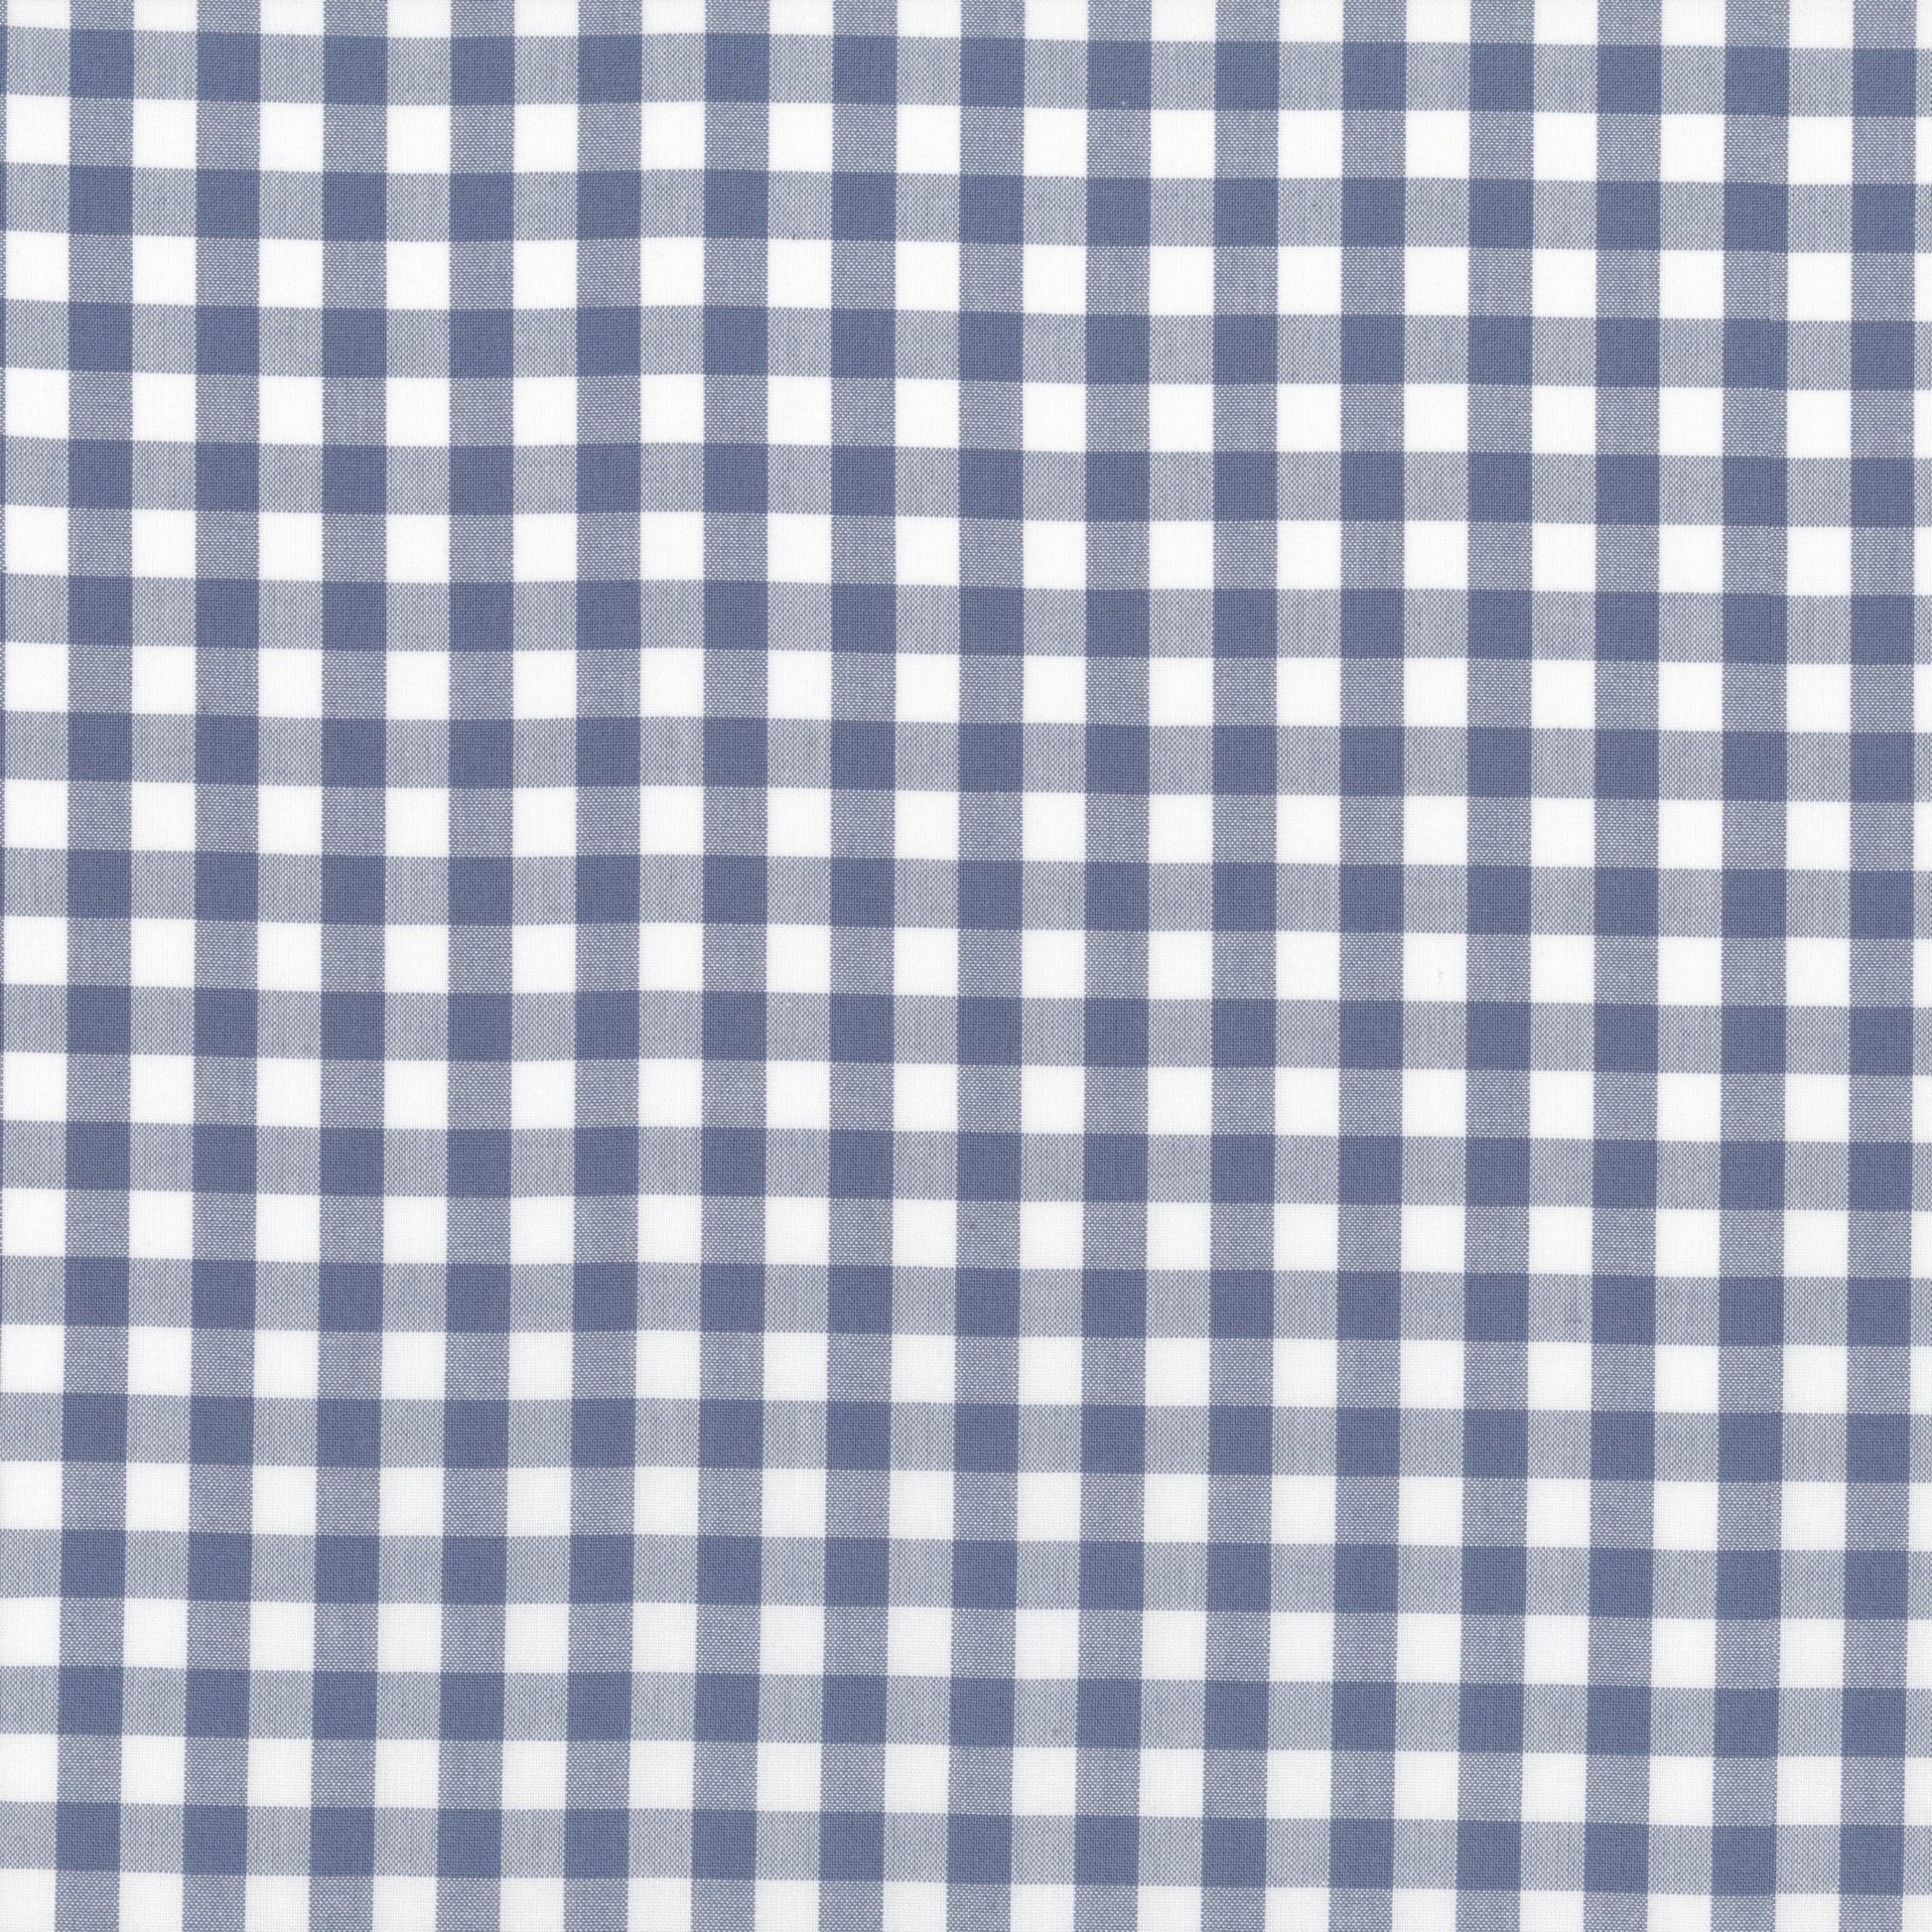 Blue Gingham Crib Bedding Swatches - New Arrivals Inc